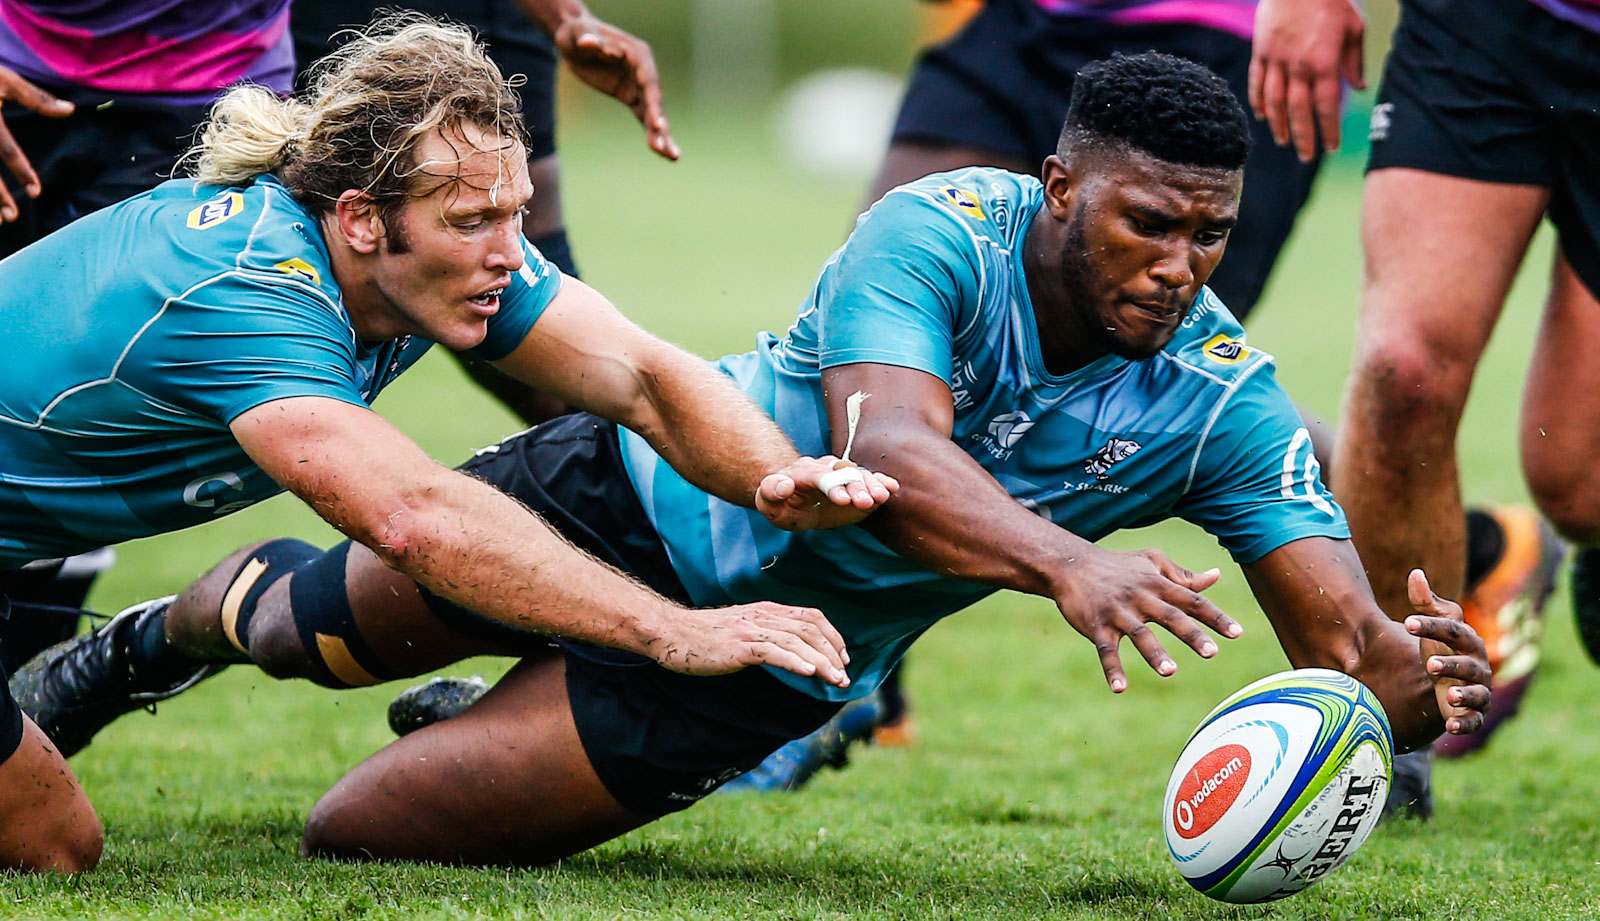 Werner Kok and Celimpilo Gumede will both make their Cell C Sharks debuts on Friday.